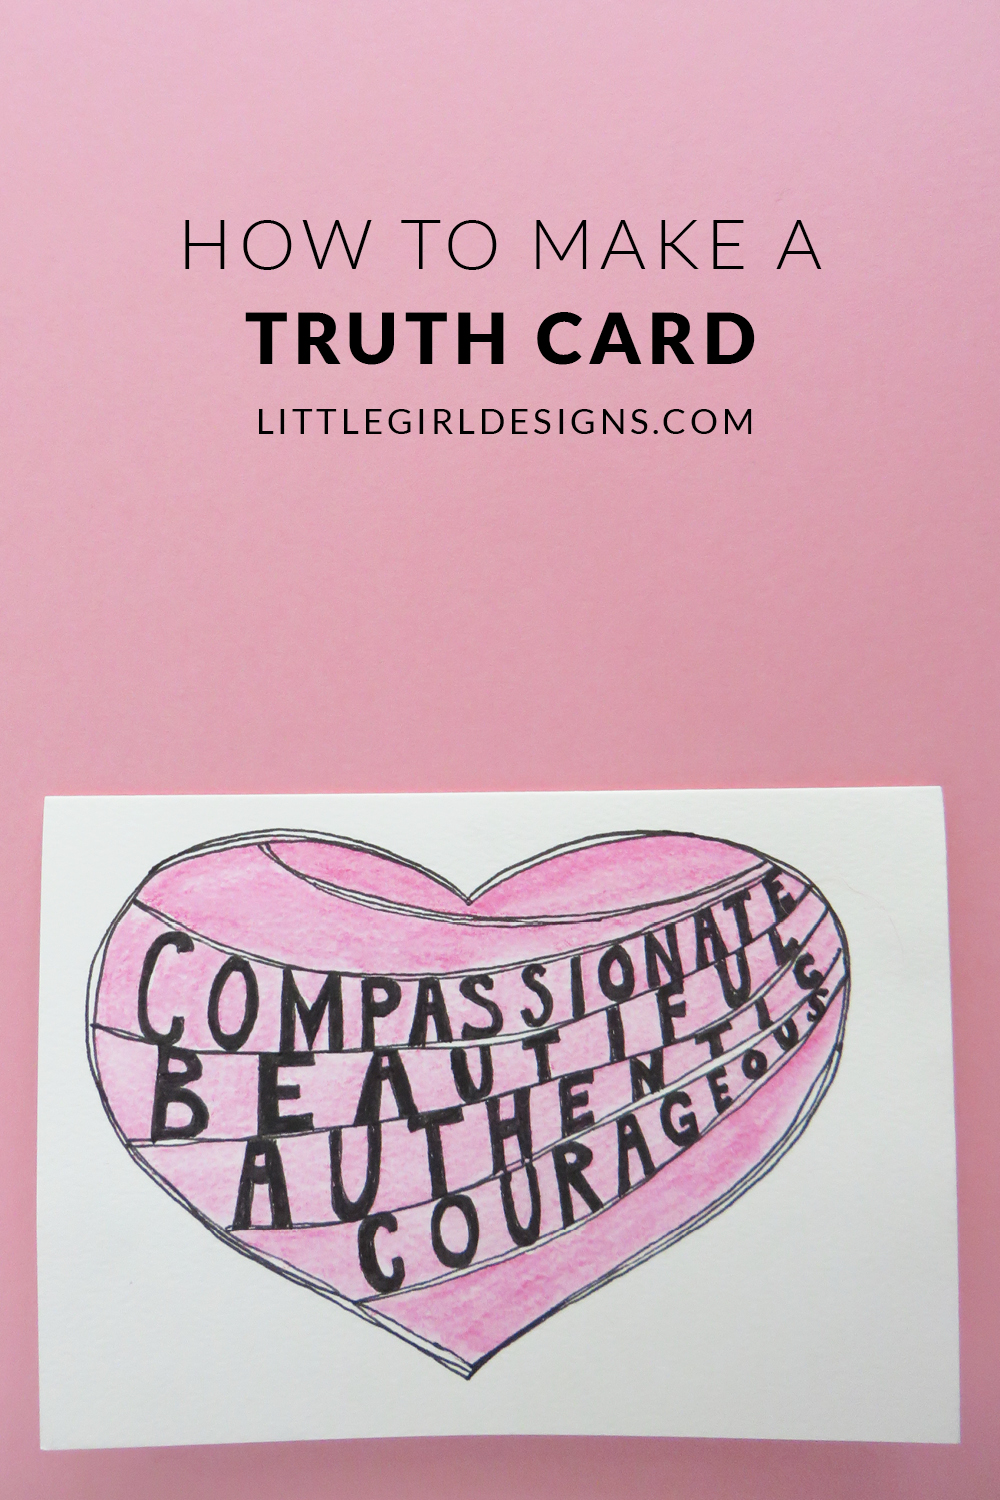 How to Make a Truth Card